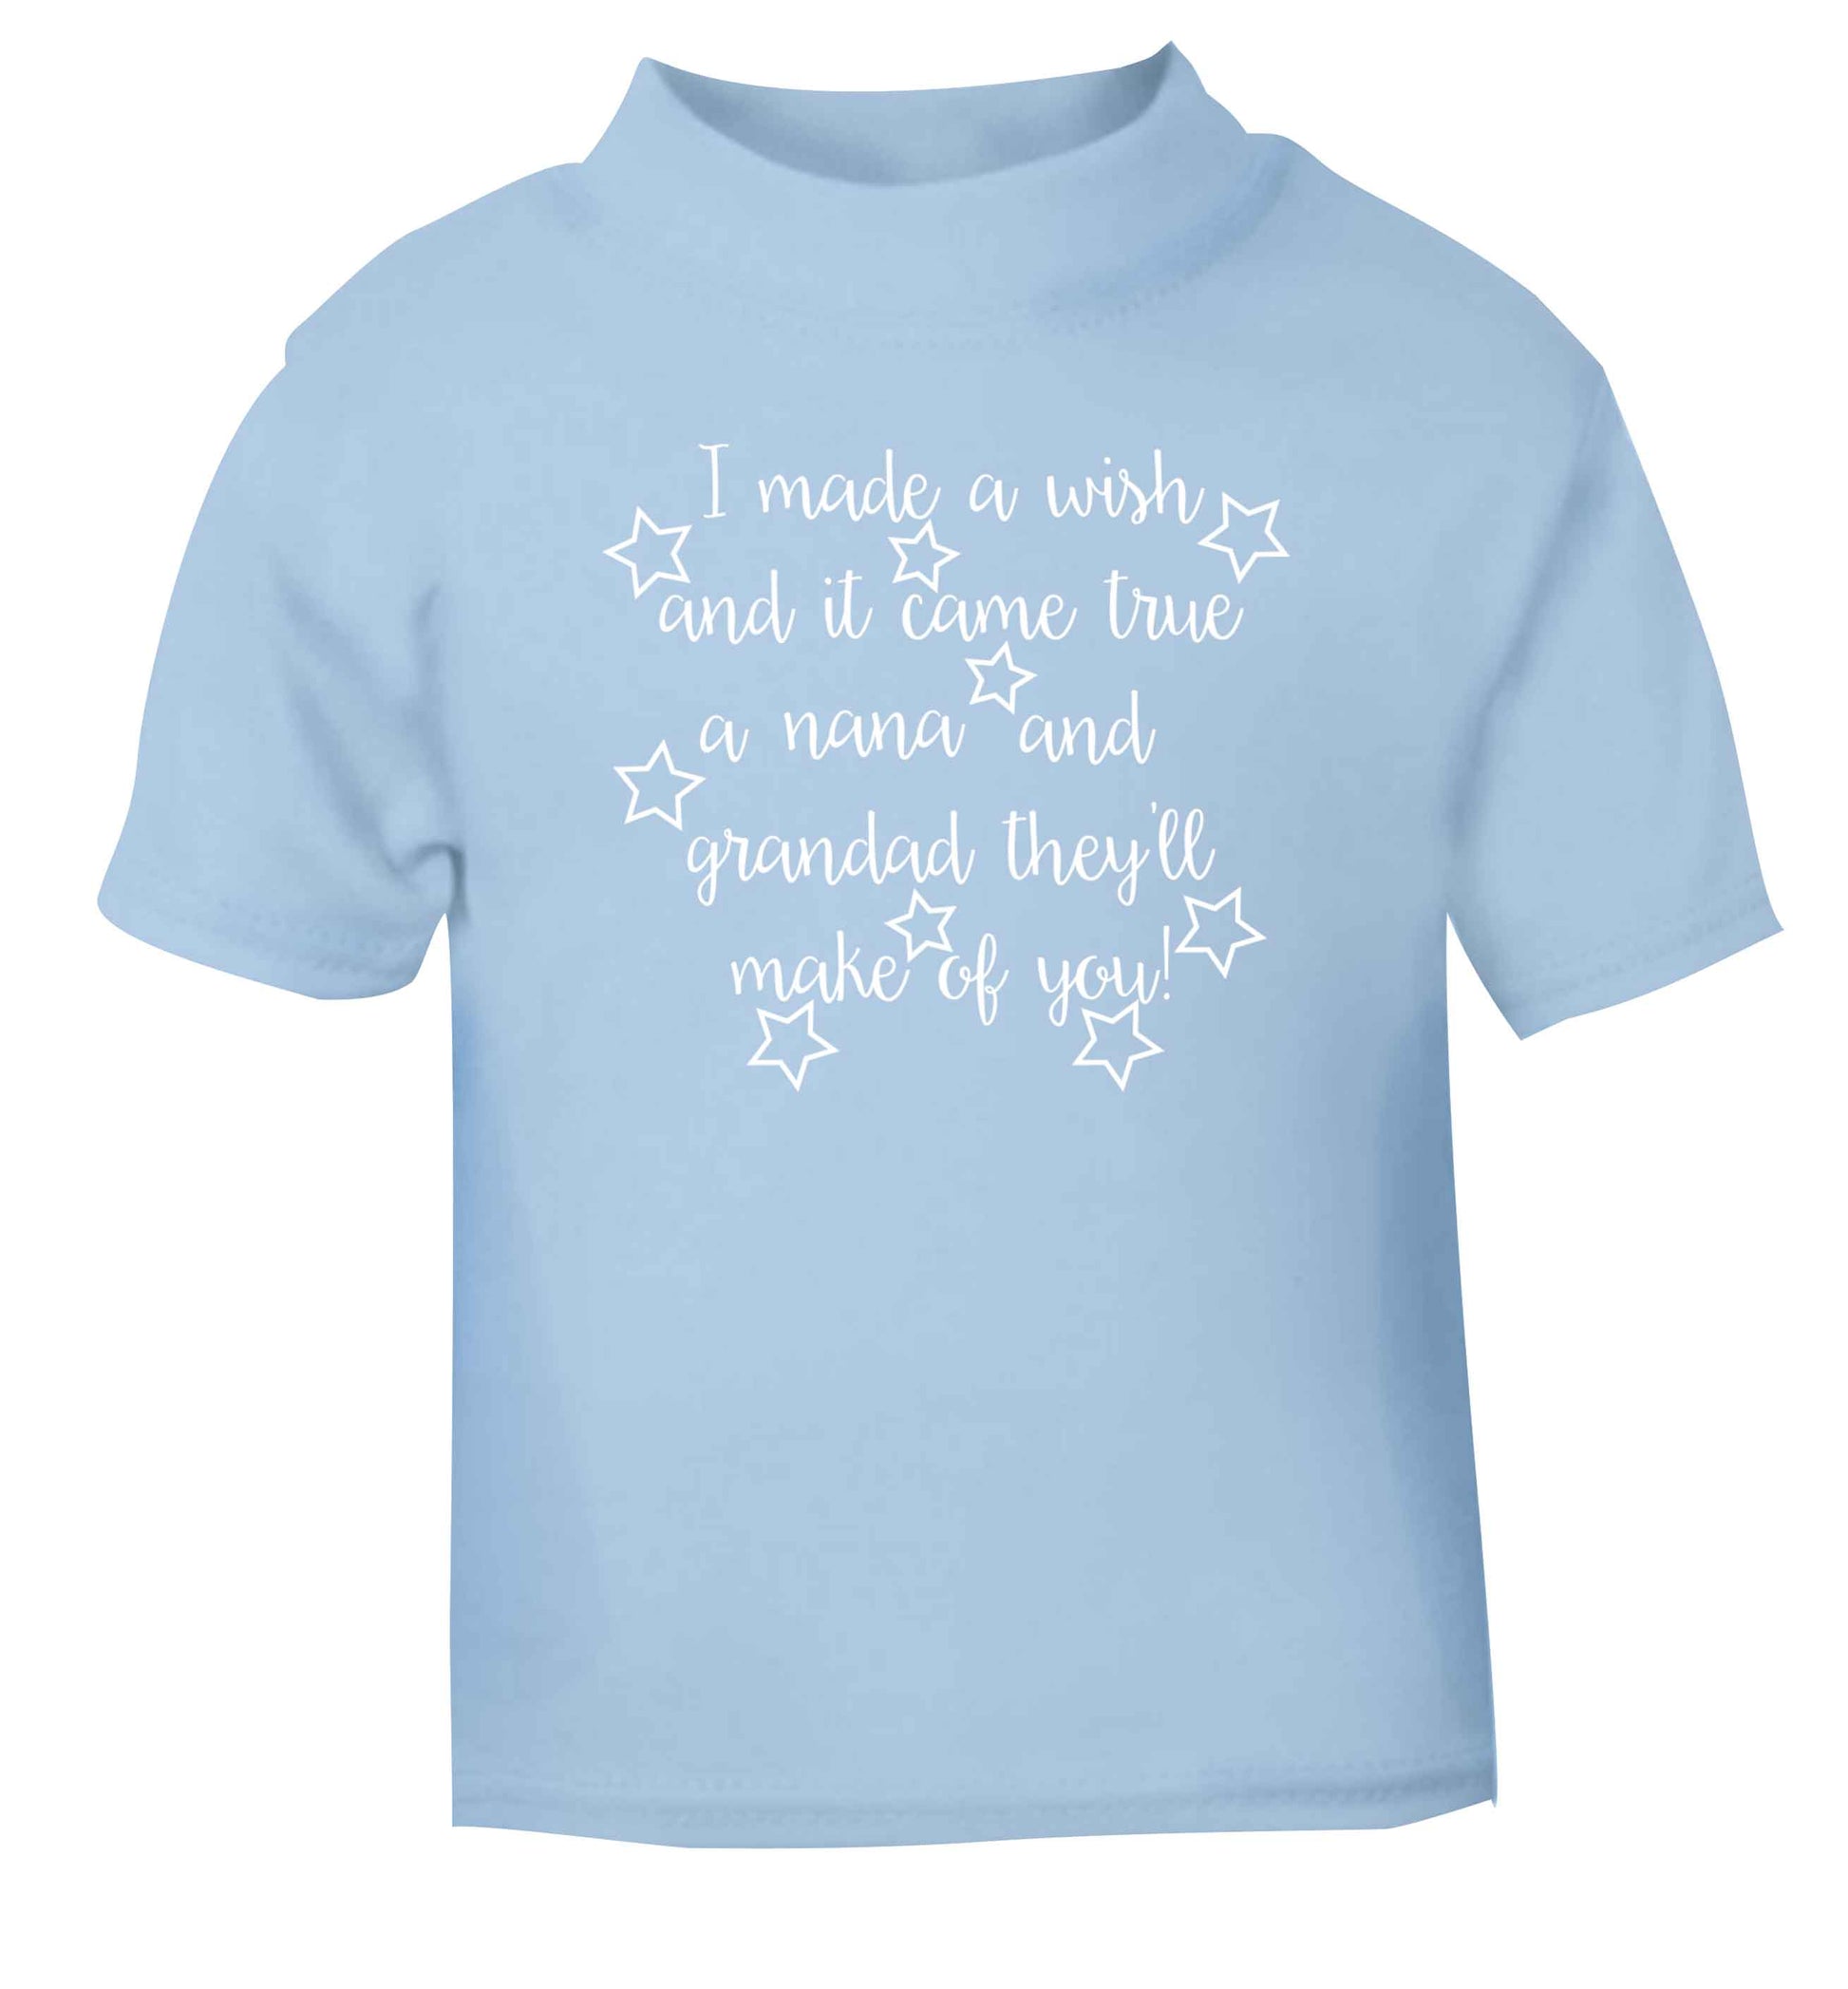 I made a wish and it came true a nana and grandad they'll make of you! light blue Baby Toddler Tshirt 2 Years